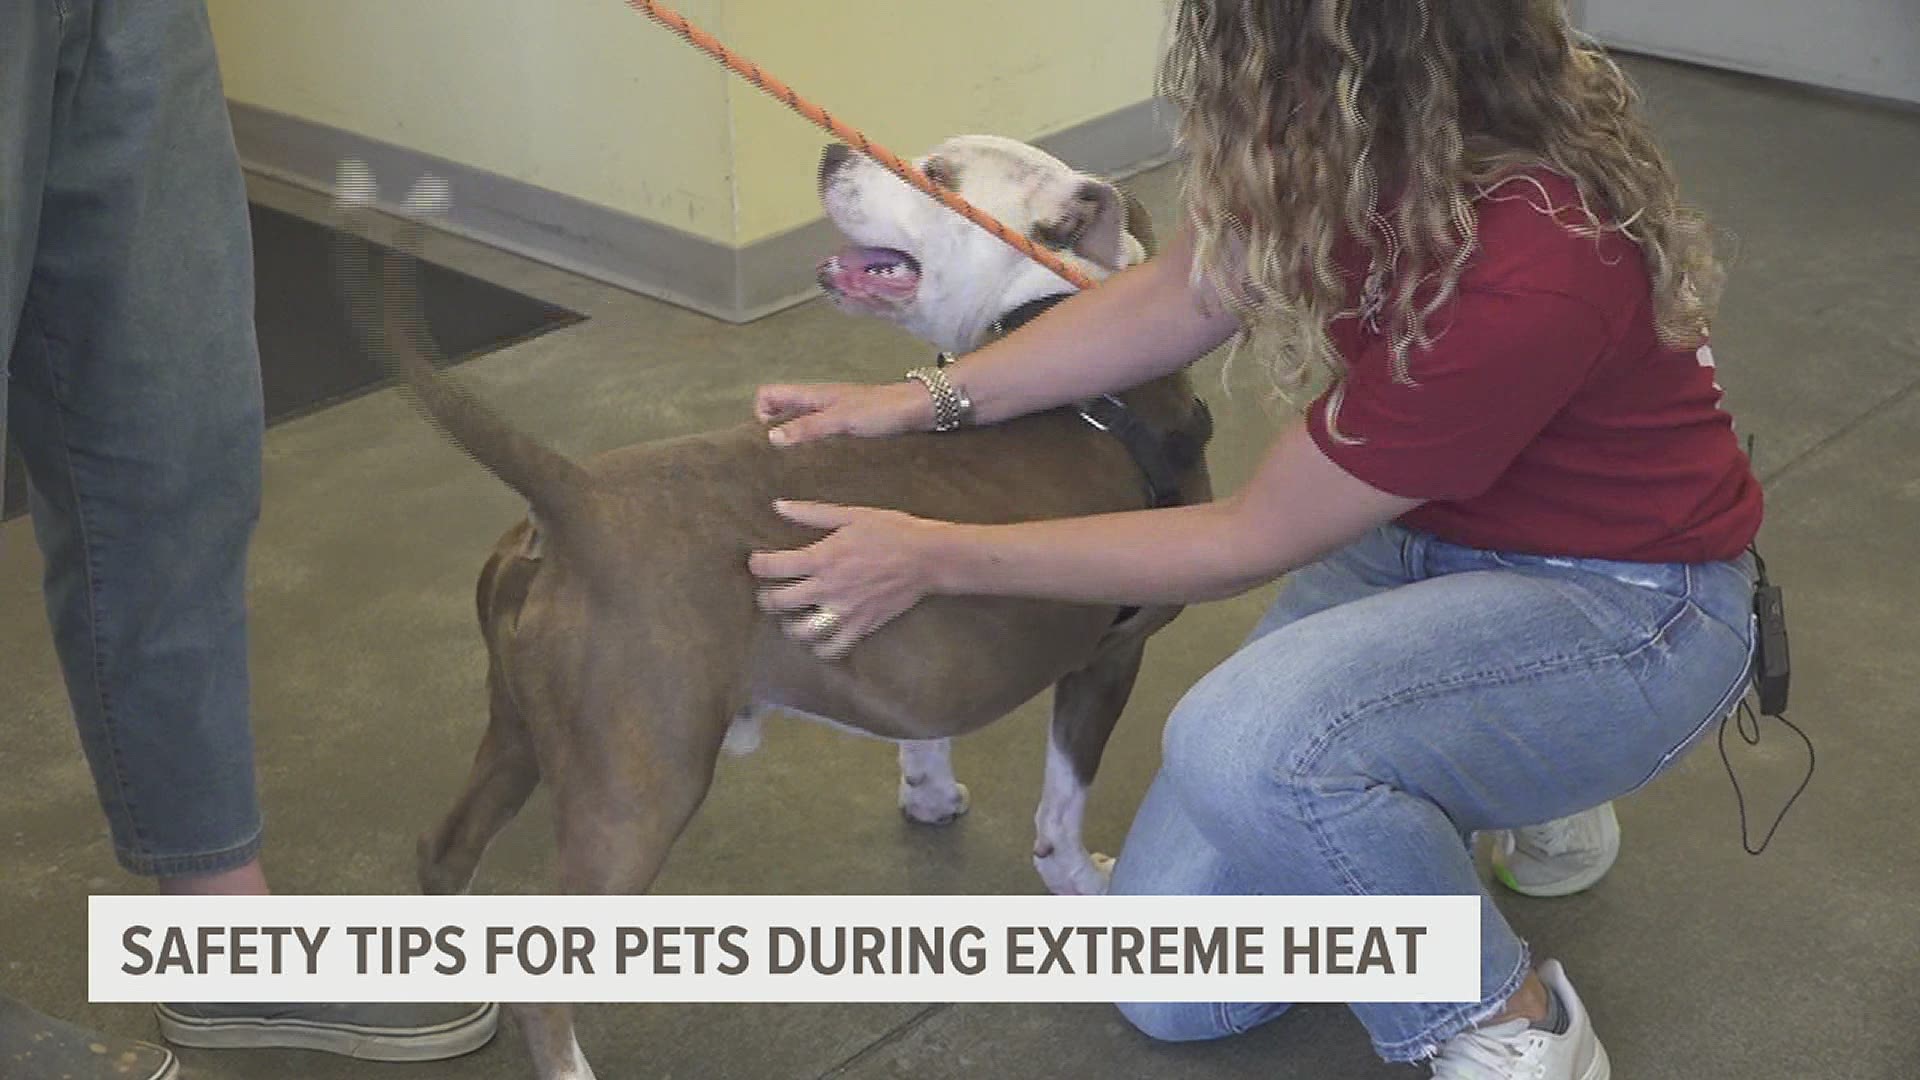 With extreme heat temperatures underway, animal experts provide safety tips to keeping animals safe.